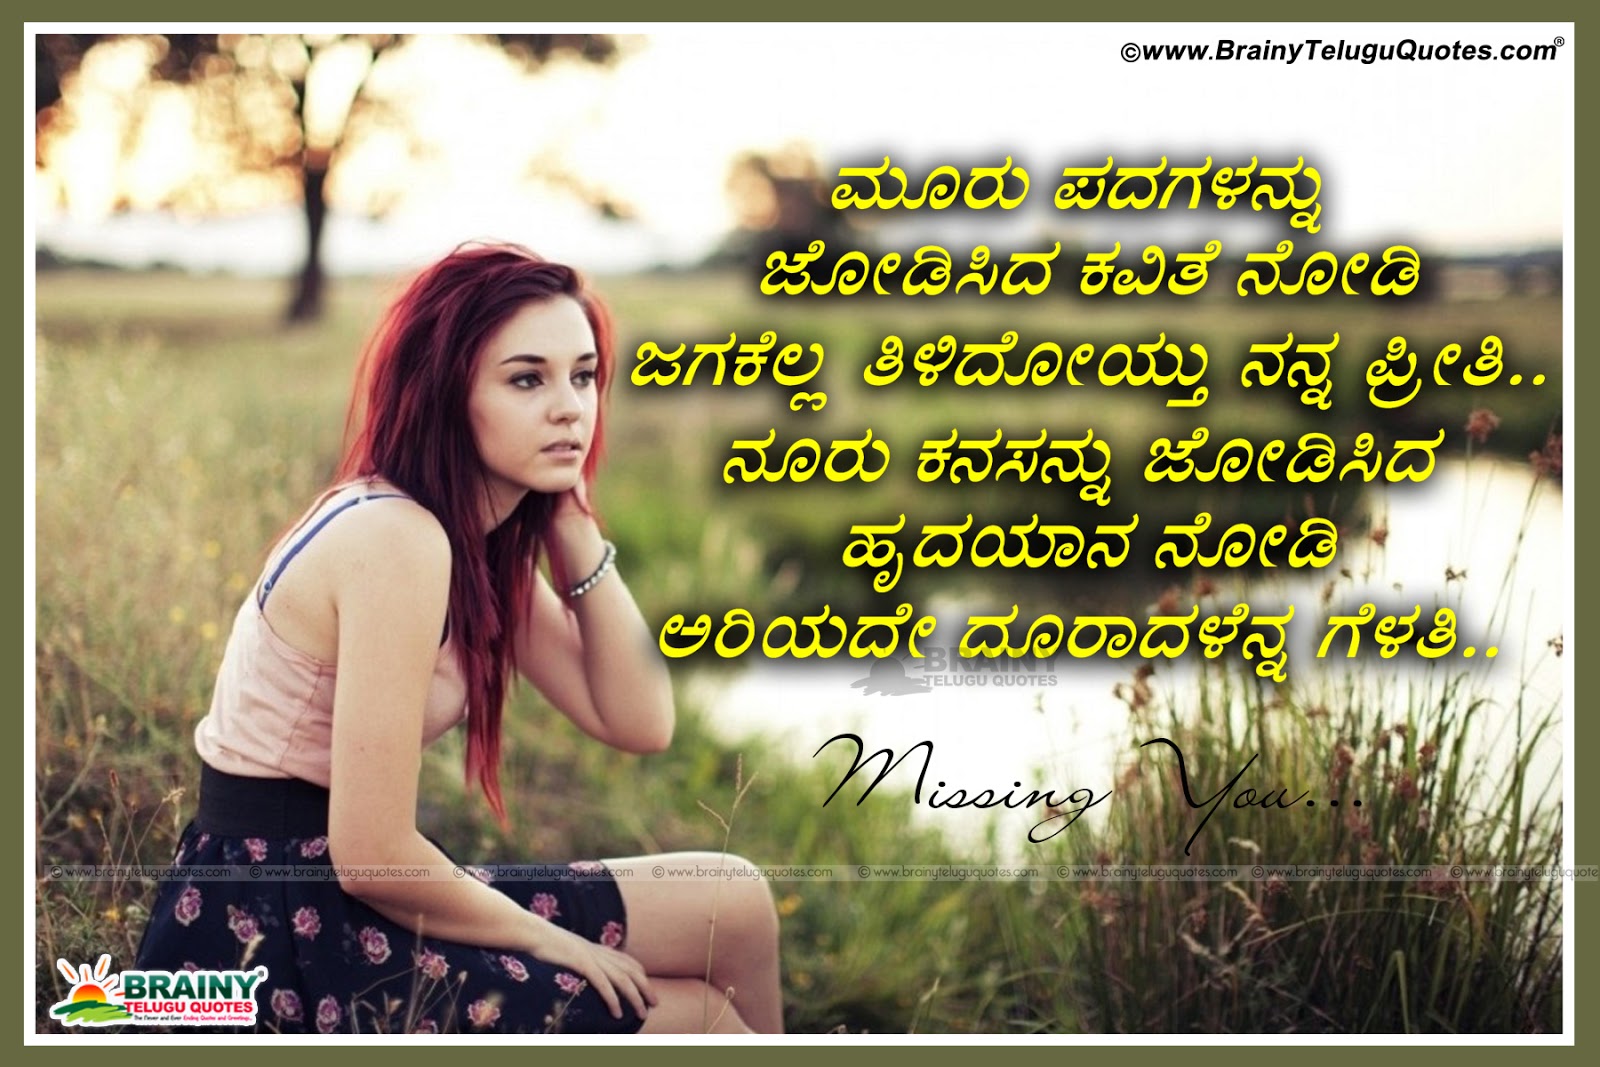 Love Feeling Latest Kannada Quotes Hd Wallpapers Brainyteluguquotes Comtelugu Quotes English Quotes Hindi Quotes Tamil Quotes Greetings One reason i used to steal my sister's magazines when i was younger @kavana_official pic.twitter.com/vyg76hzrk1. love feeling latest kannada quotes hd